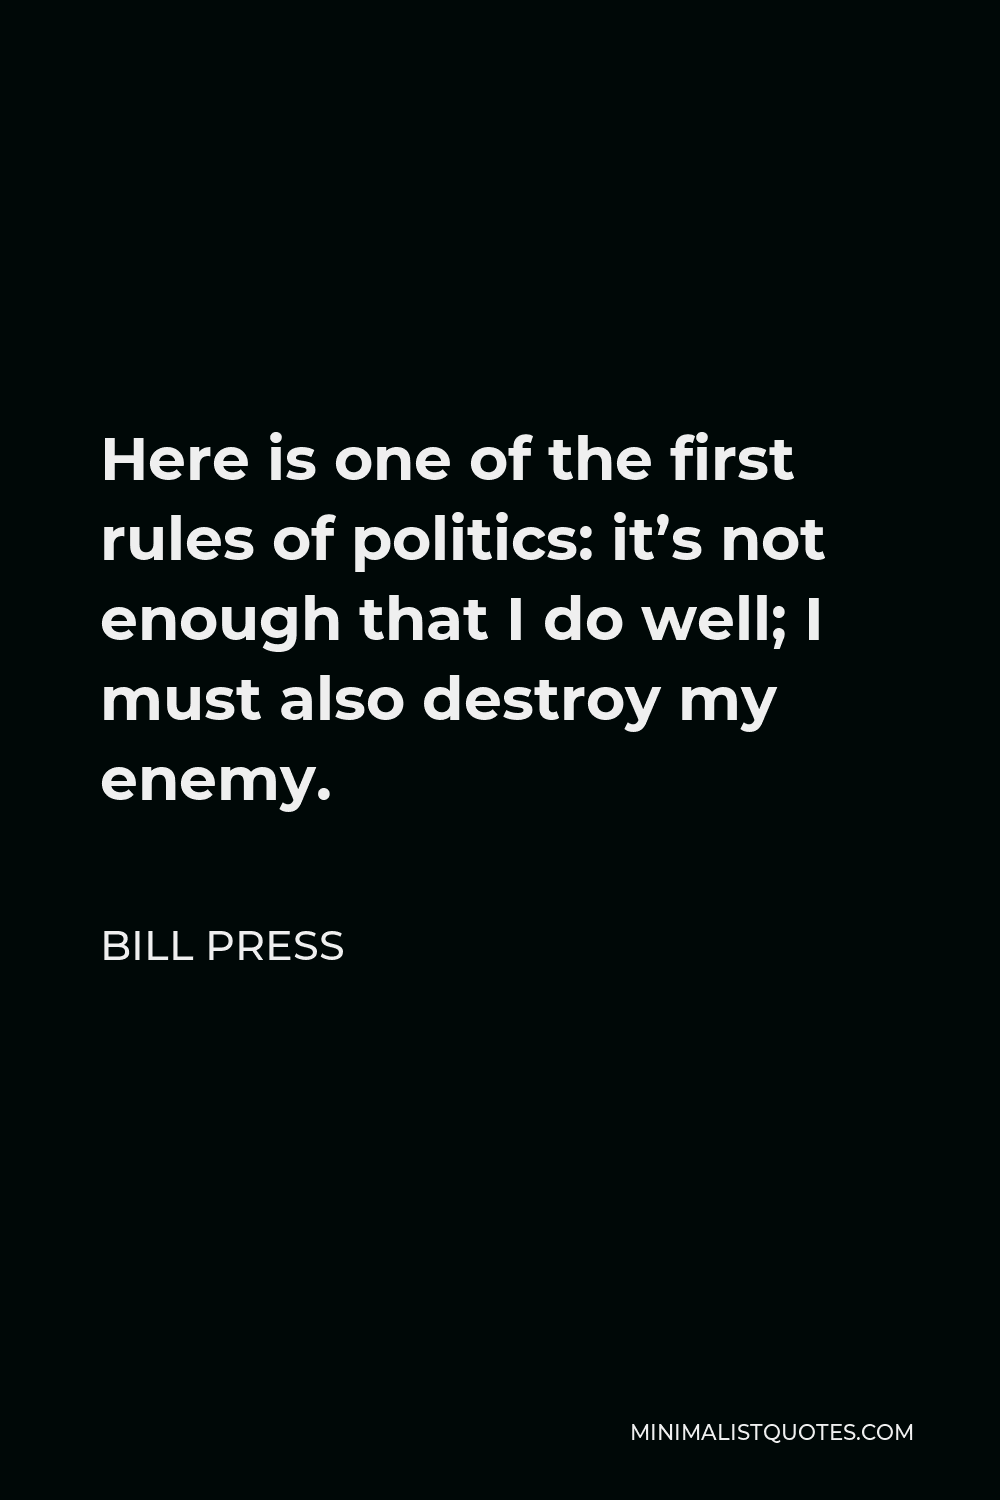 Bill Press Quote - Here is one of the first rules of politics: it’s not enough that I do well; I must also destroy my enemy.